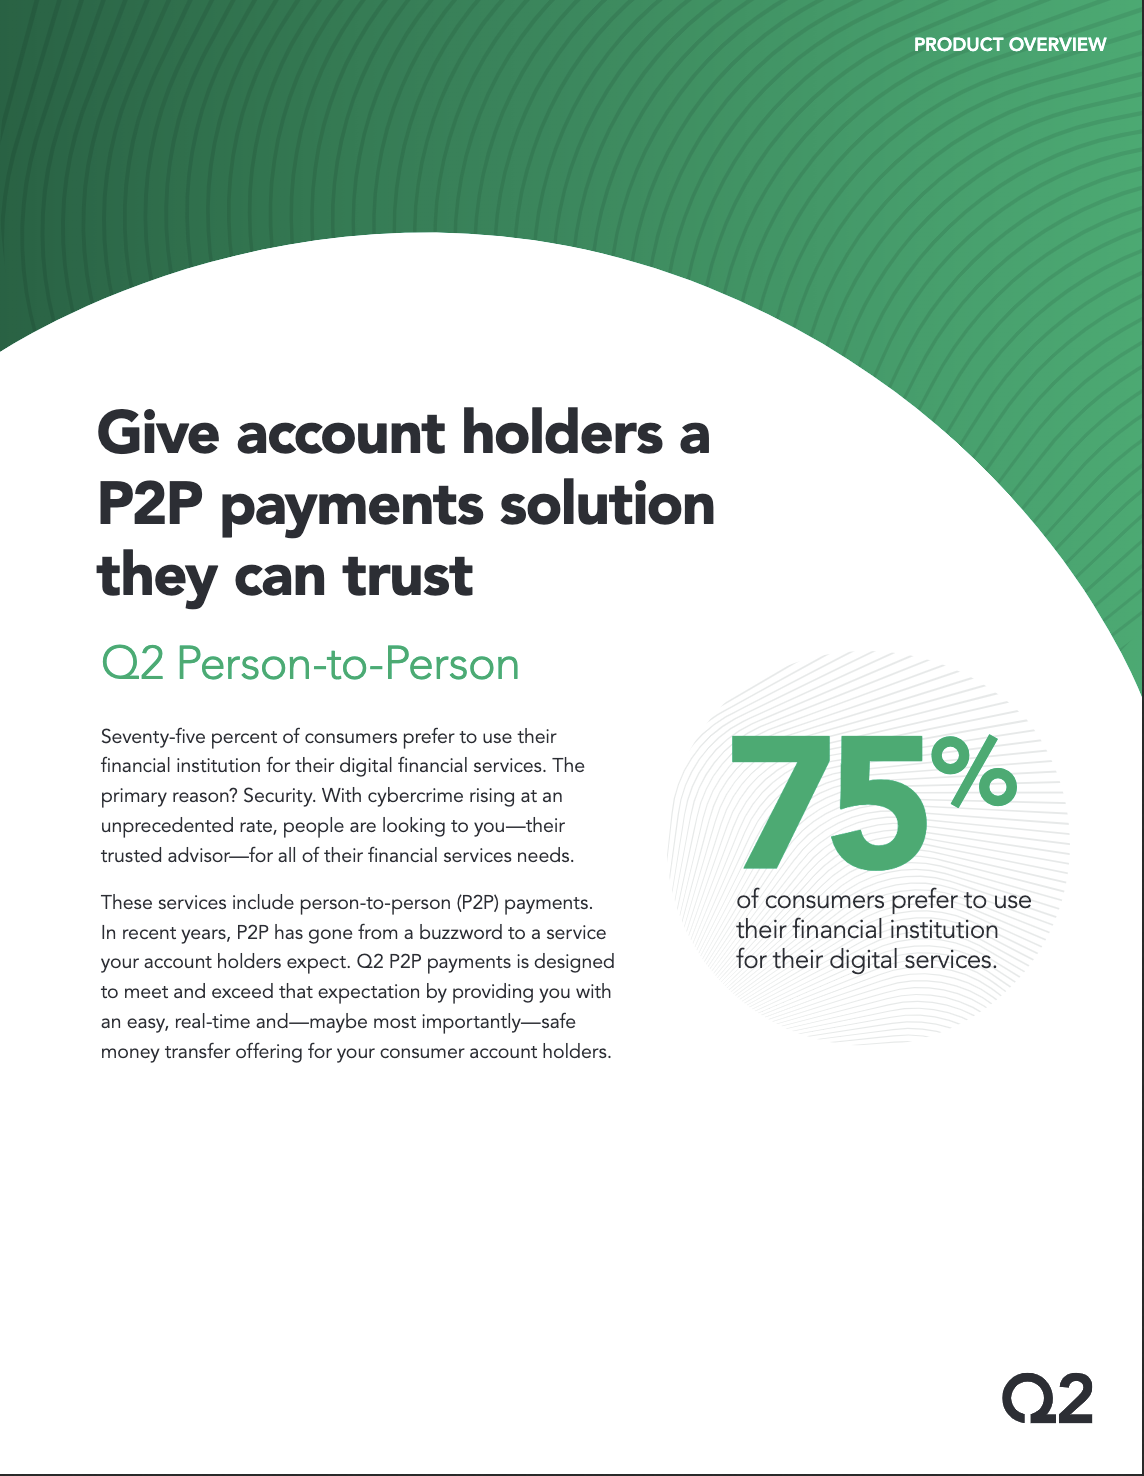 Give account holders a P2P payment solution they can trust